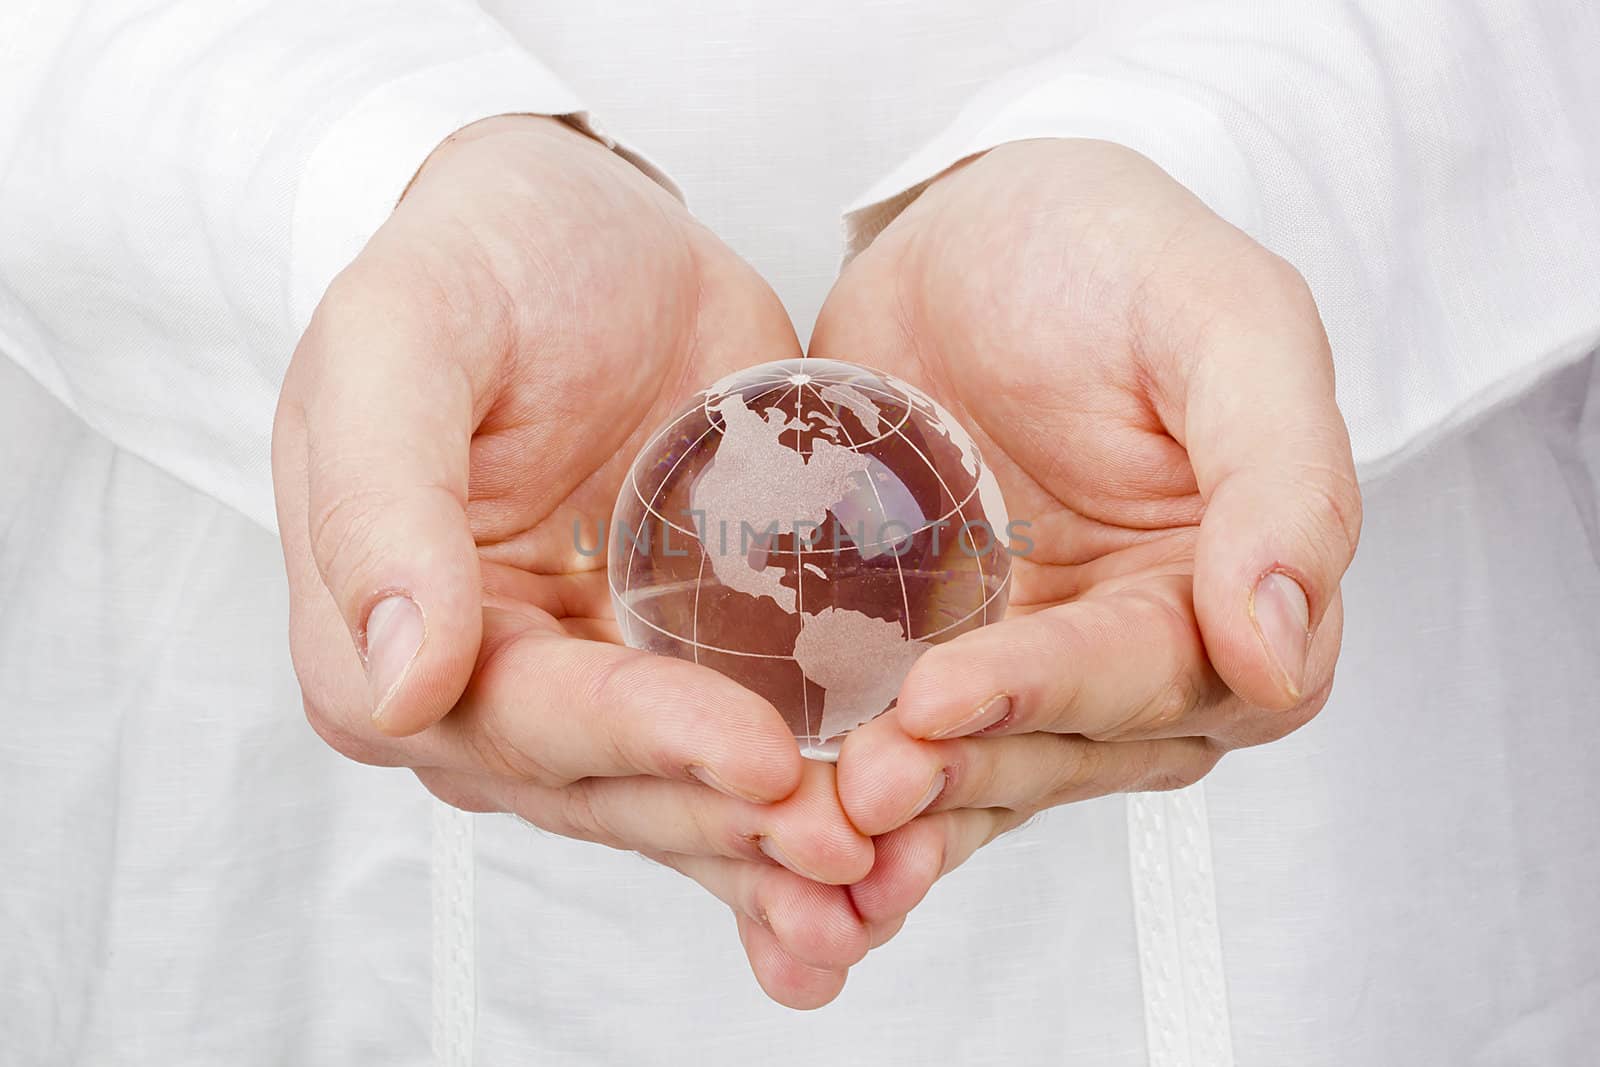 Close-up photograph of a glass globe in a man's hands.